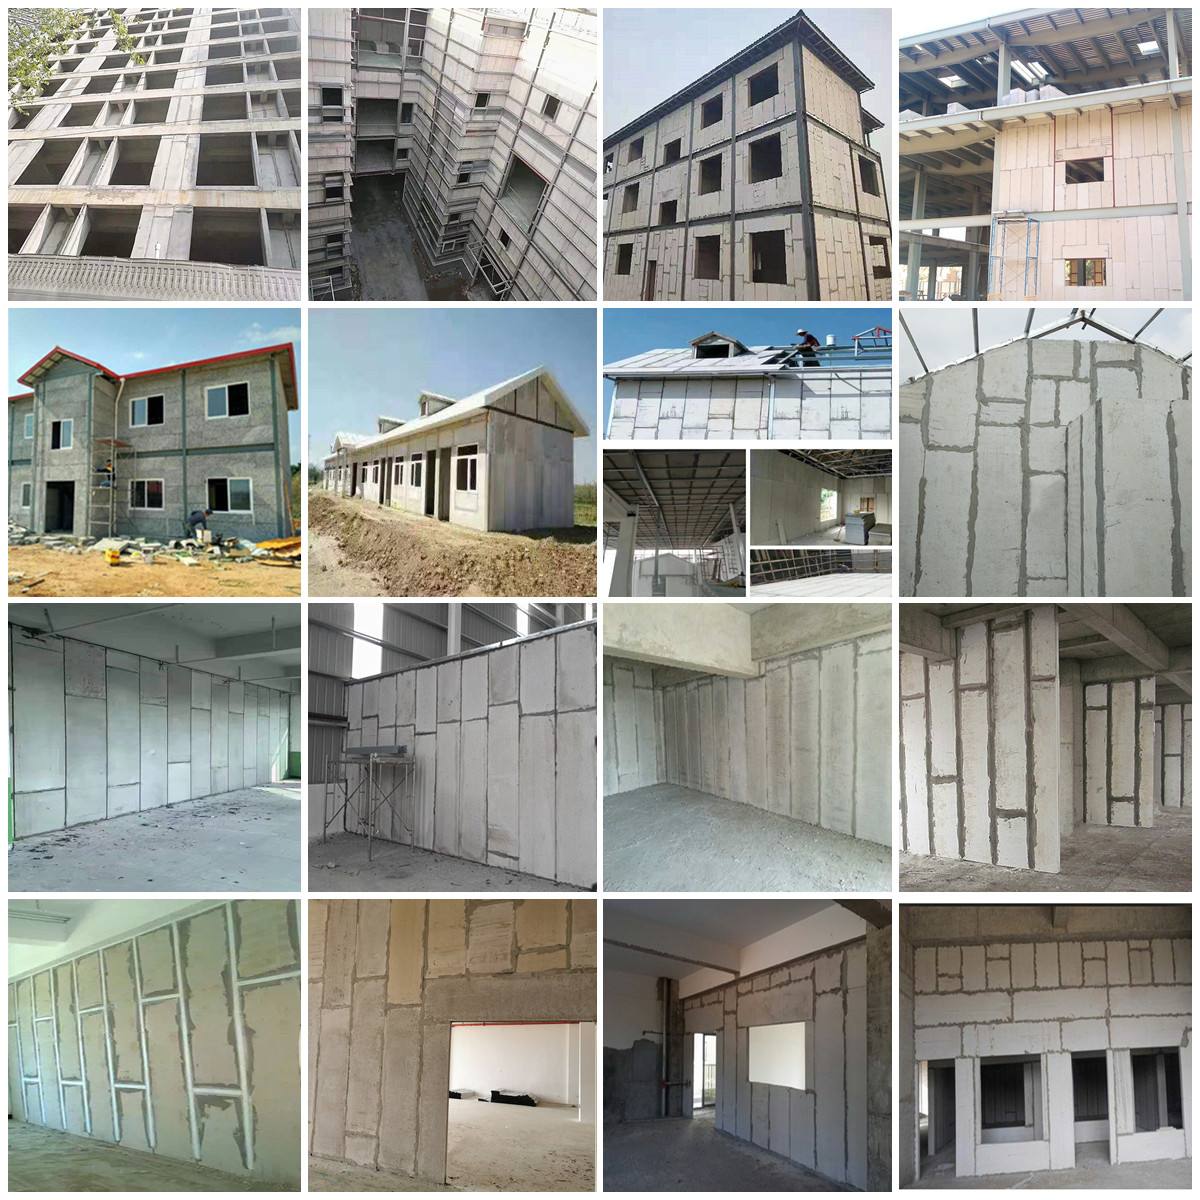 QiangBang lightweight wall panels indoor decorative materials fireproof moisture-proof board thermal insulation